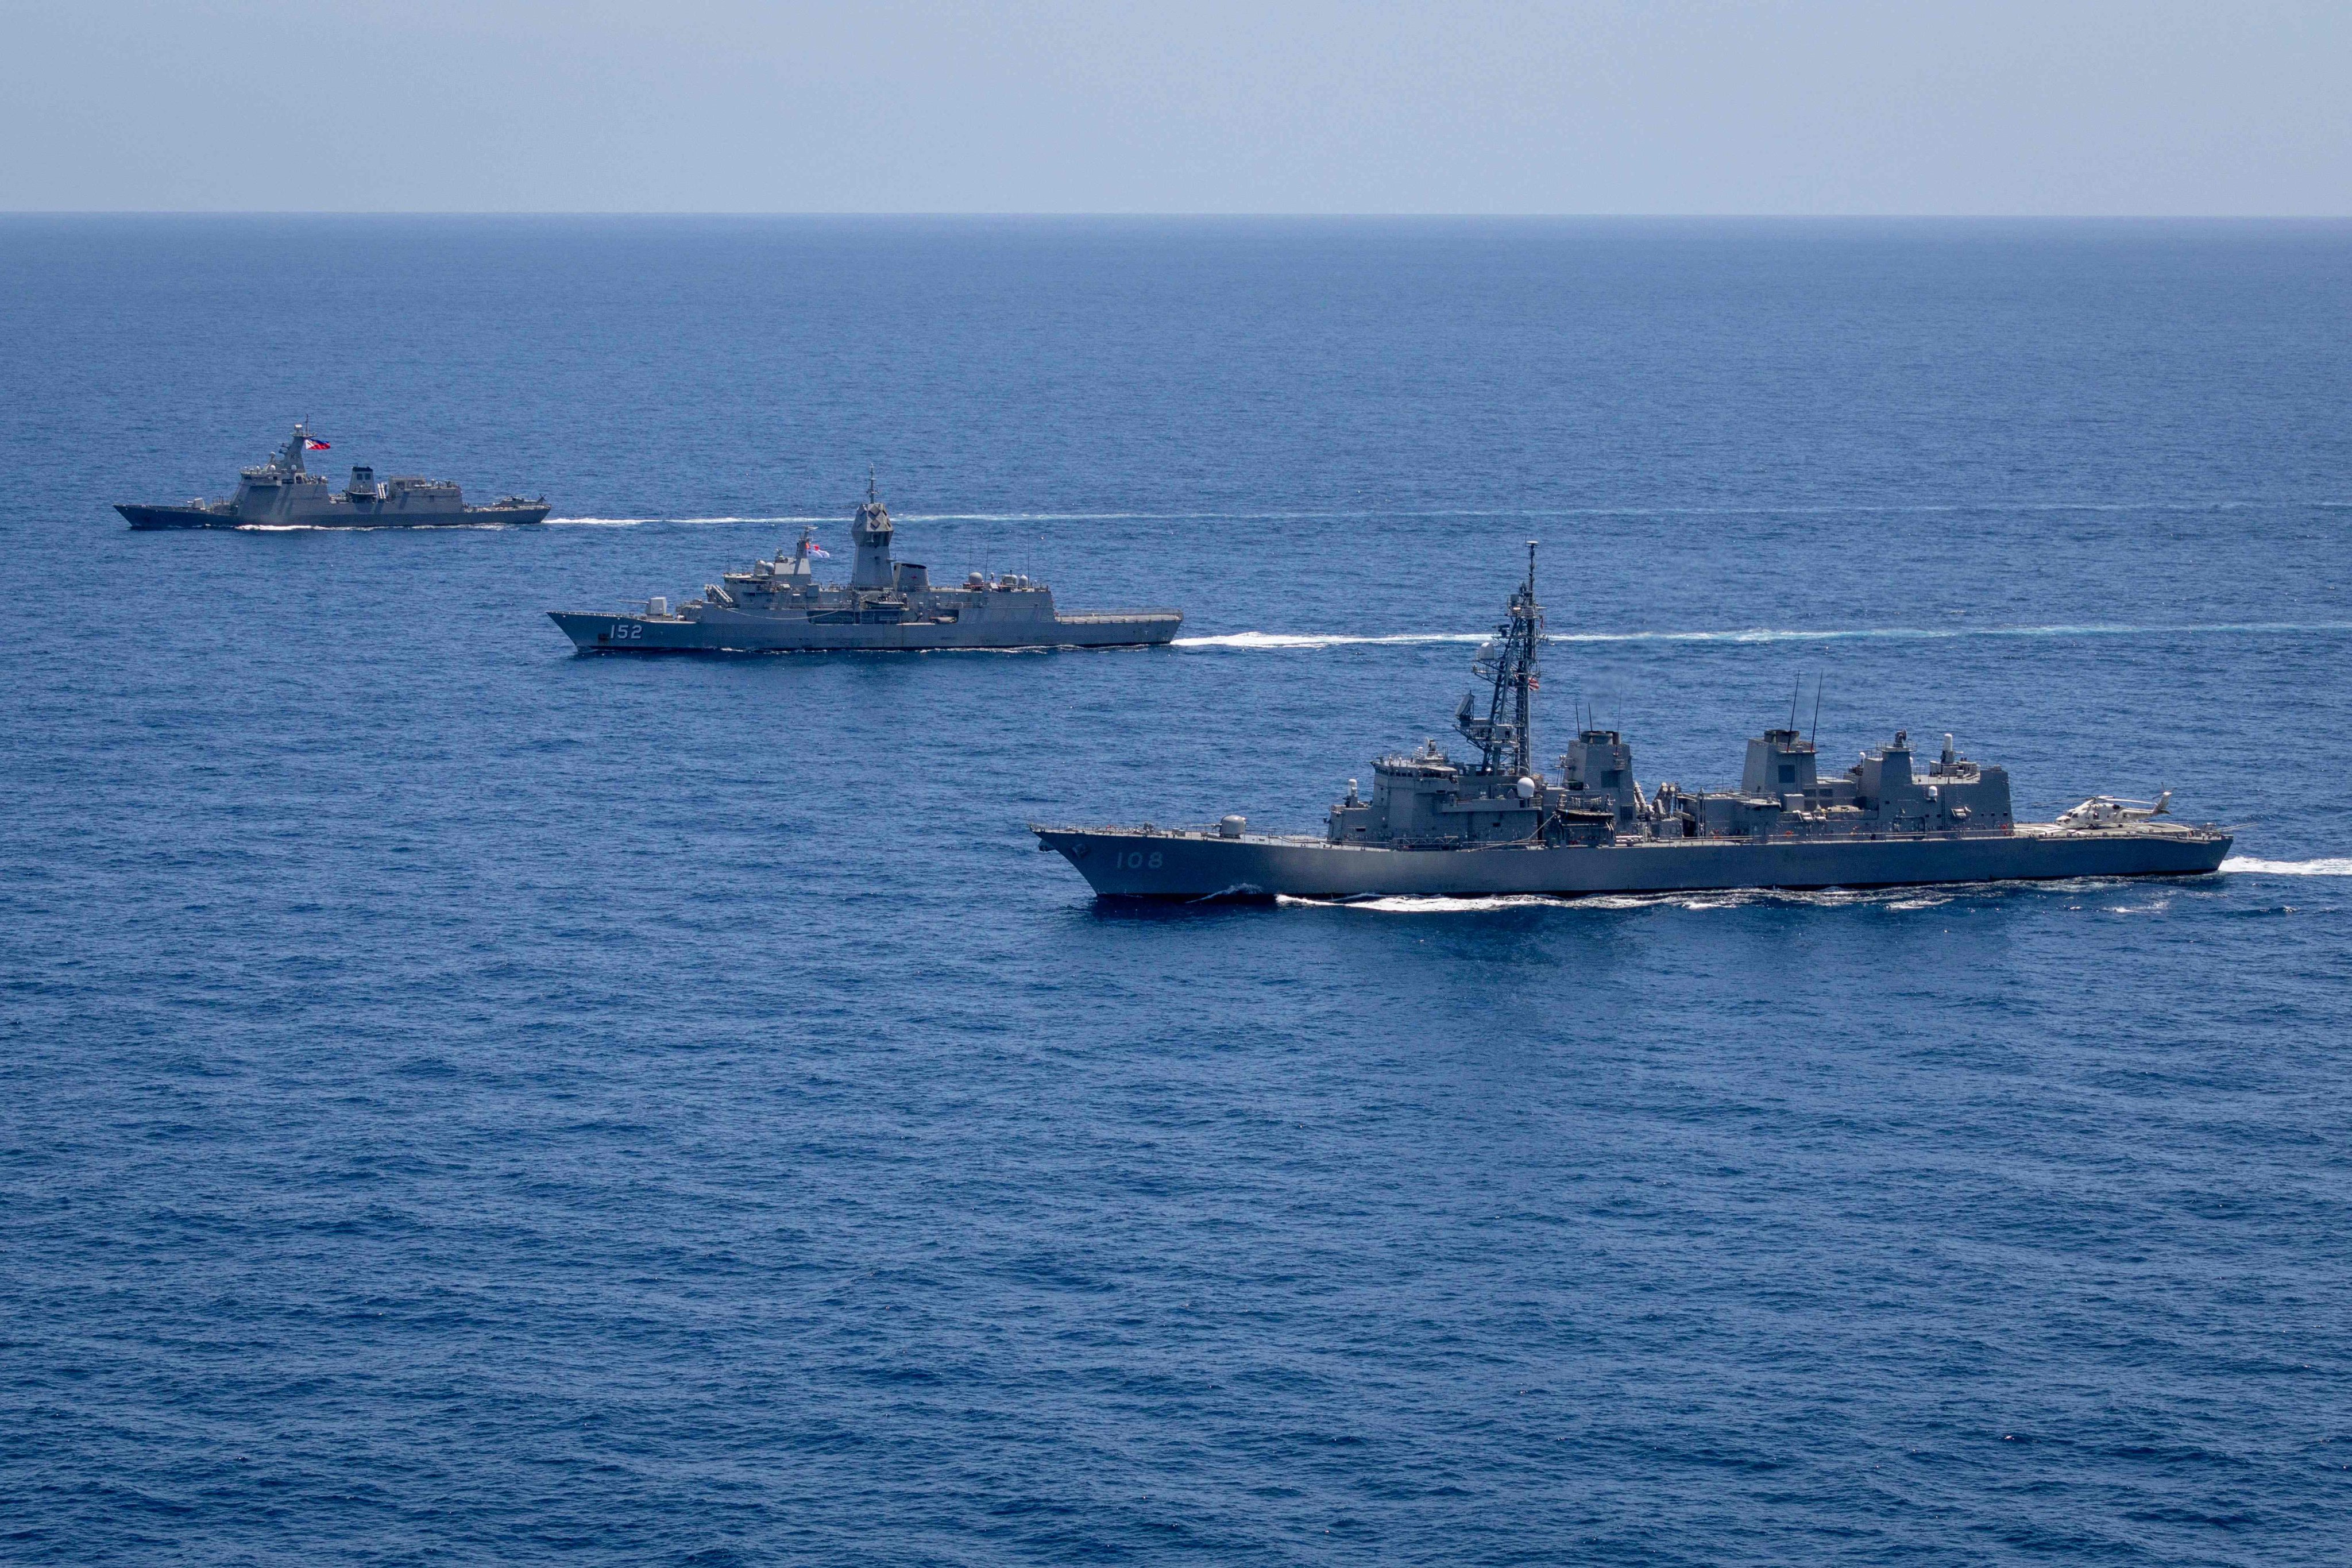 Ships sail in formation during a “maritime cooperative activity” between Australia, the United States, Japan and the Philippines in Manila’s exclusive economic zone on April 7. Photo: AFP/Australian Department of Defence/Leo Baumgartner